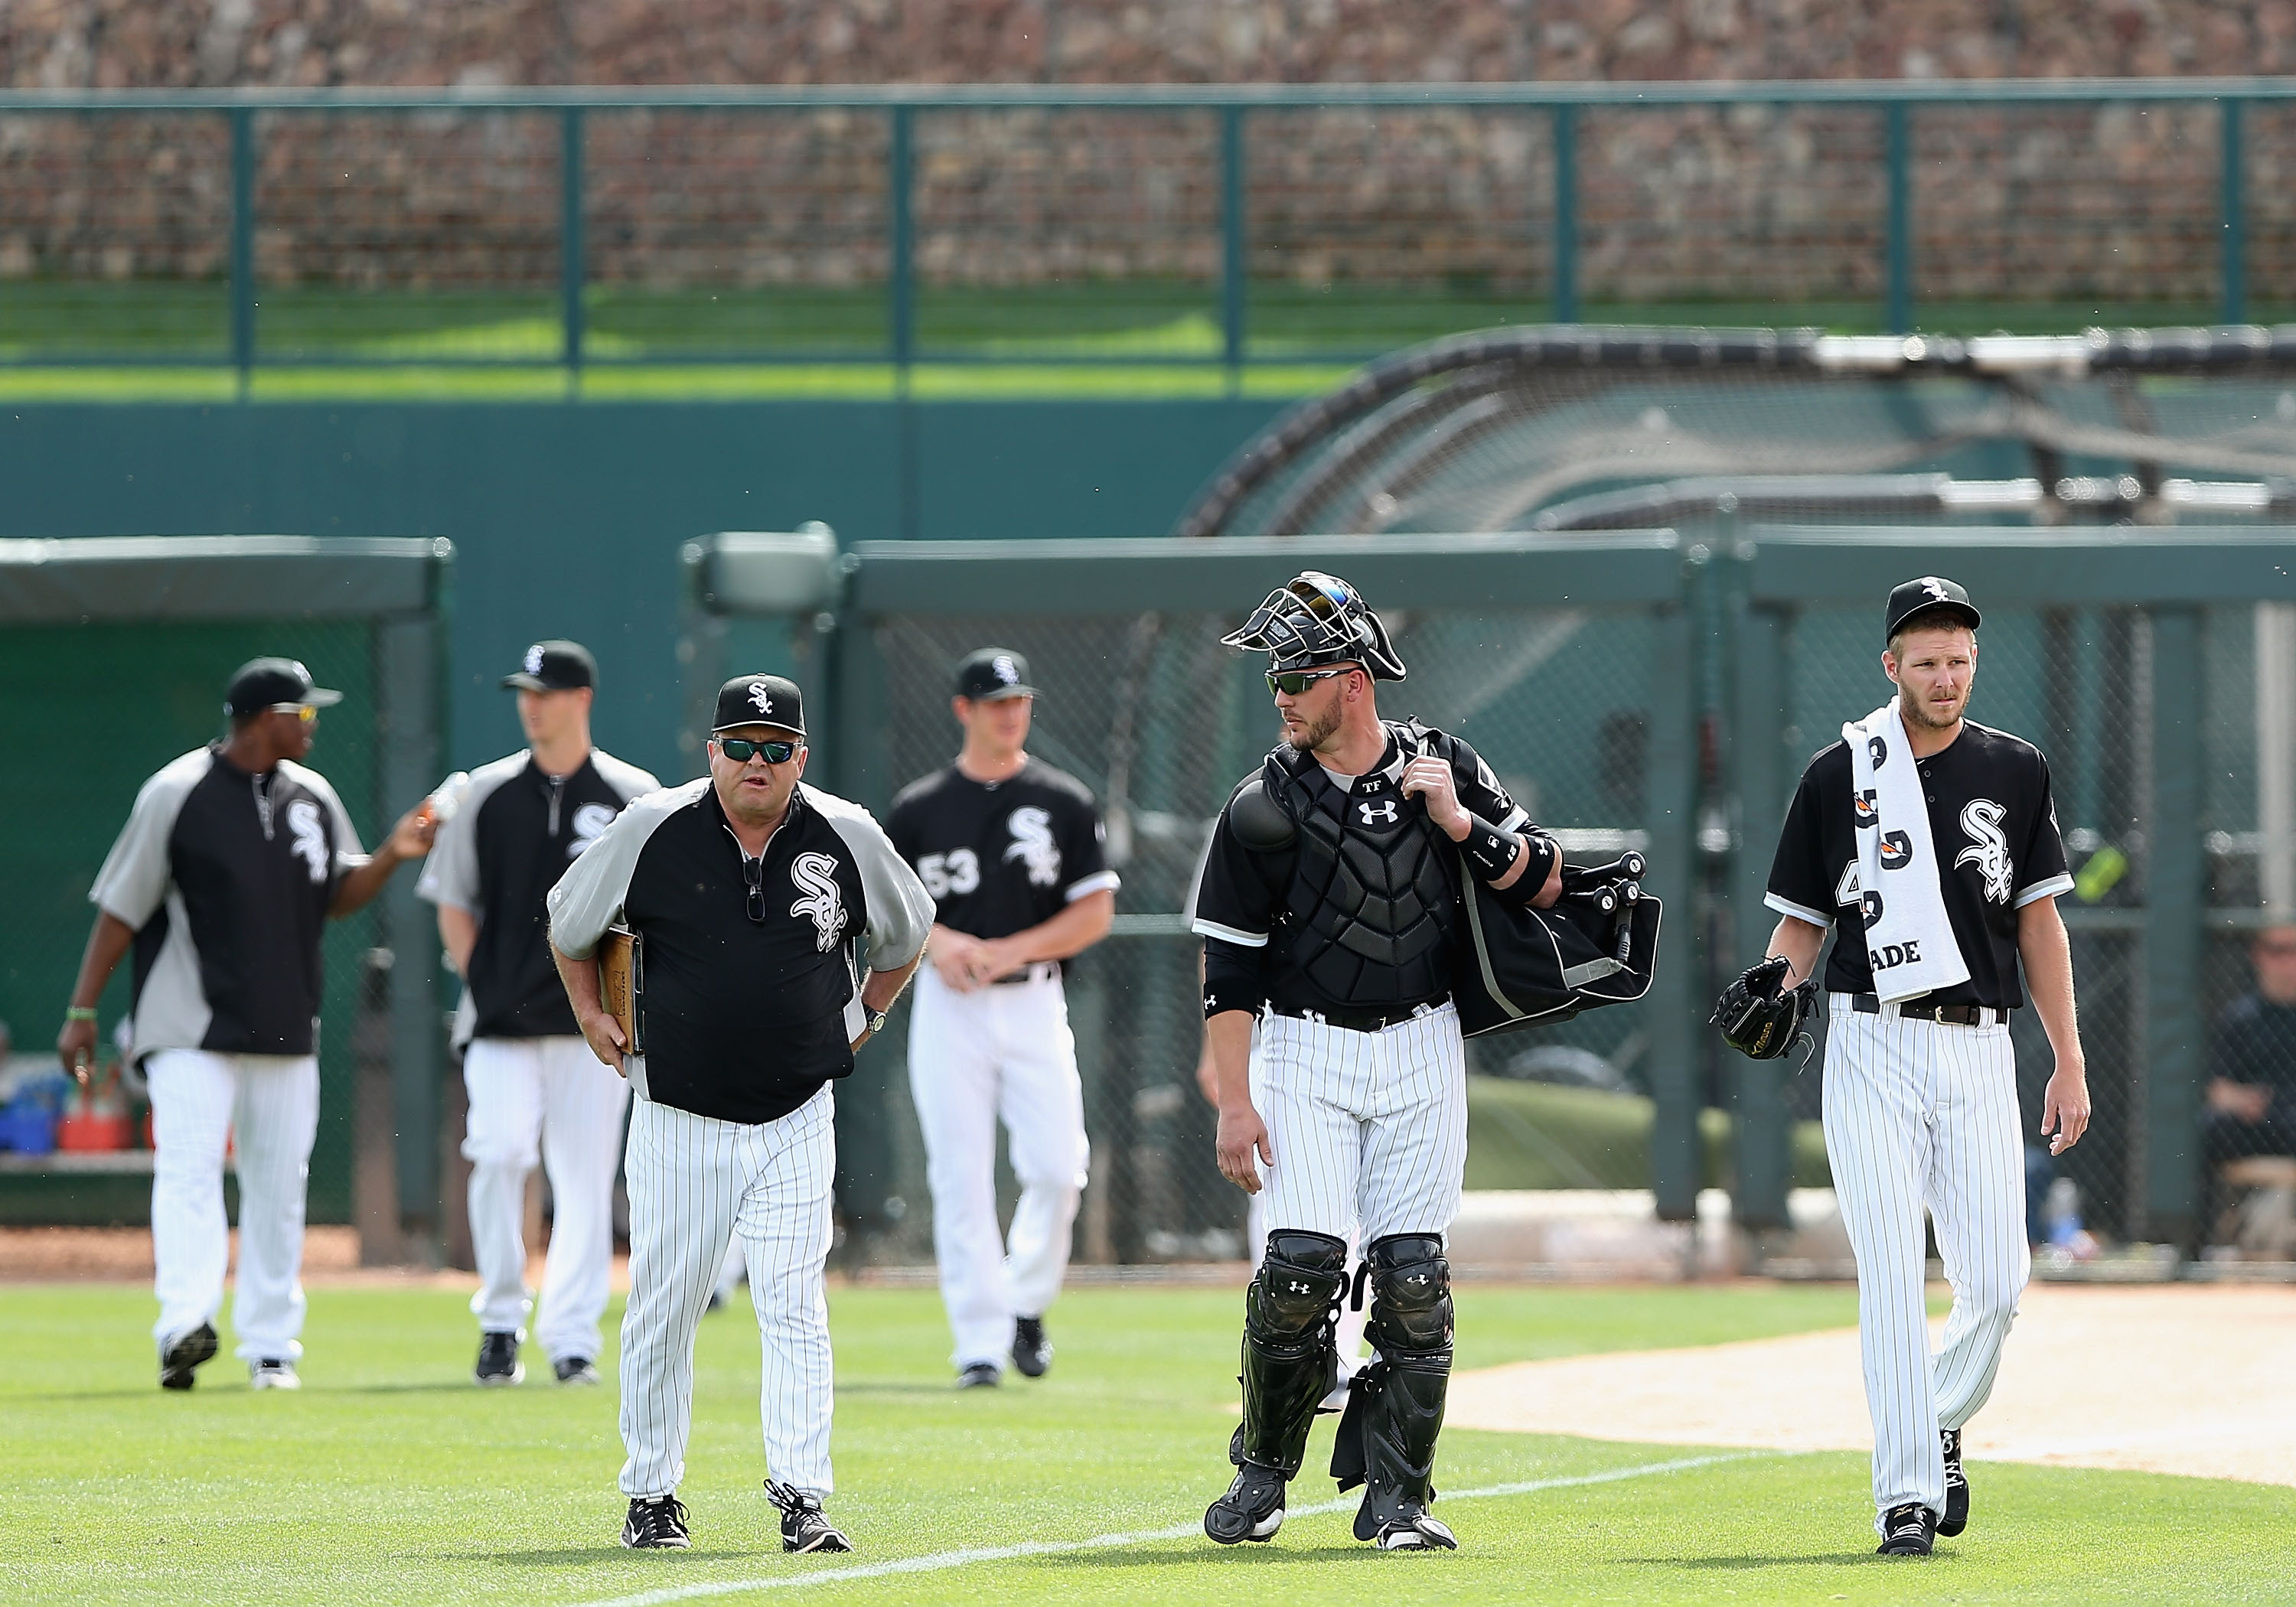 Pitchers & Catchers Spring Training Here as 1st Players Report